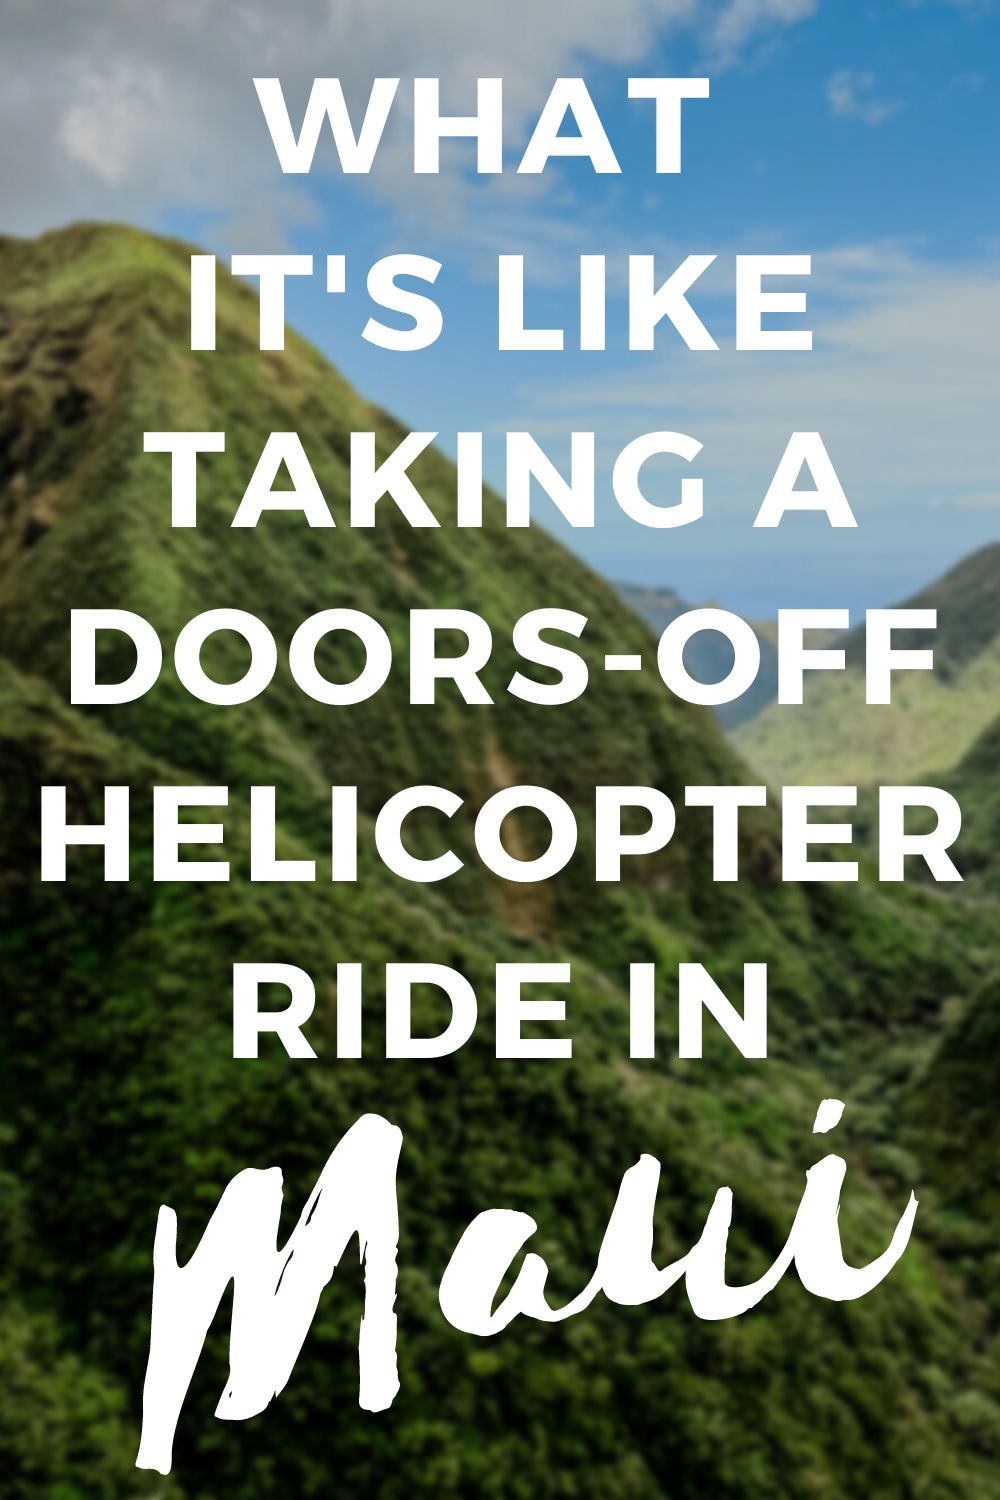 Should I Do a Doors-Off Helicopter in Maui?